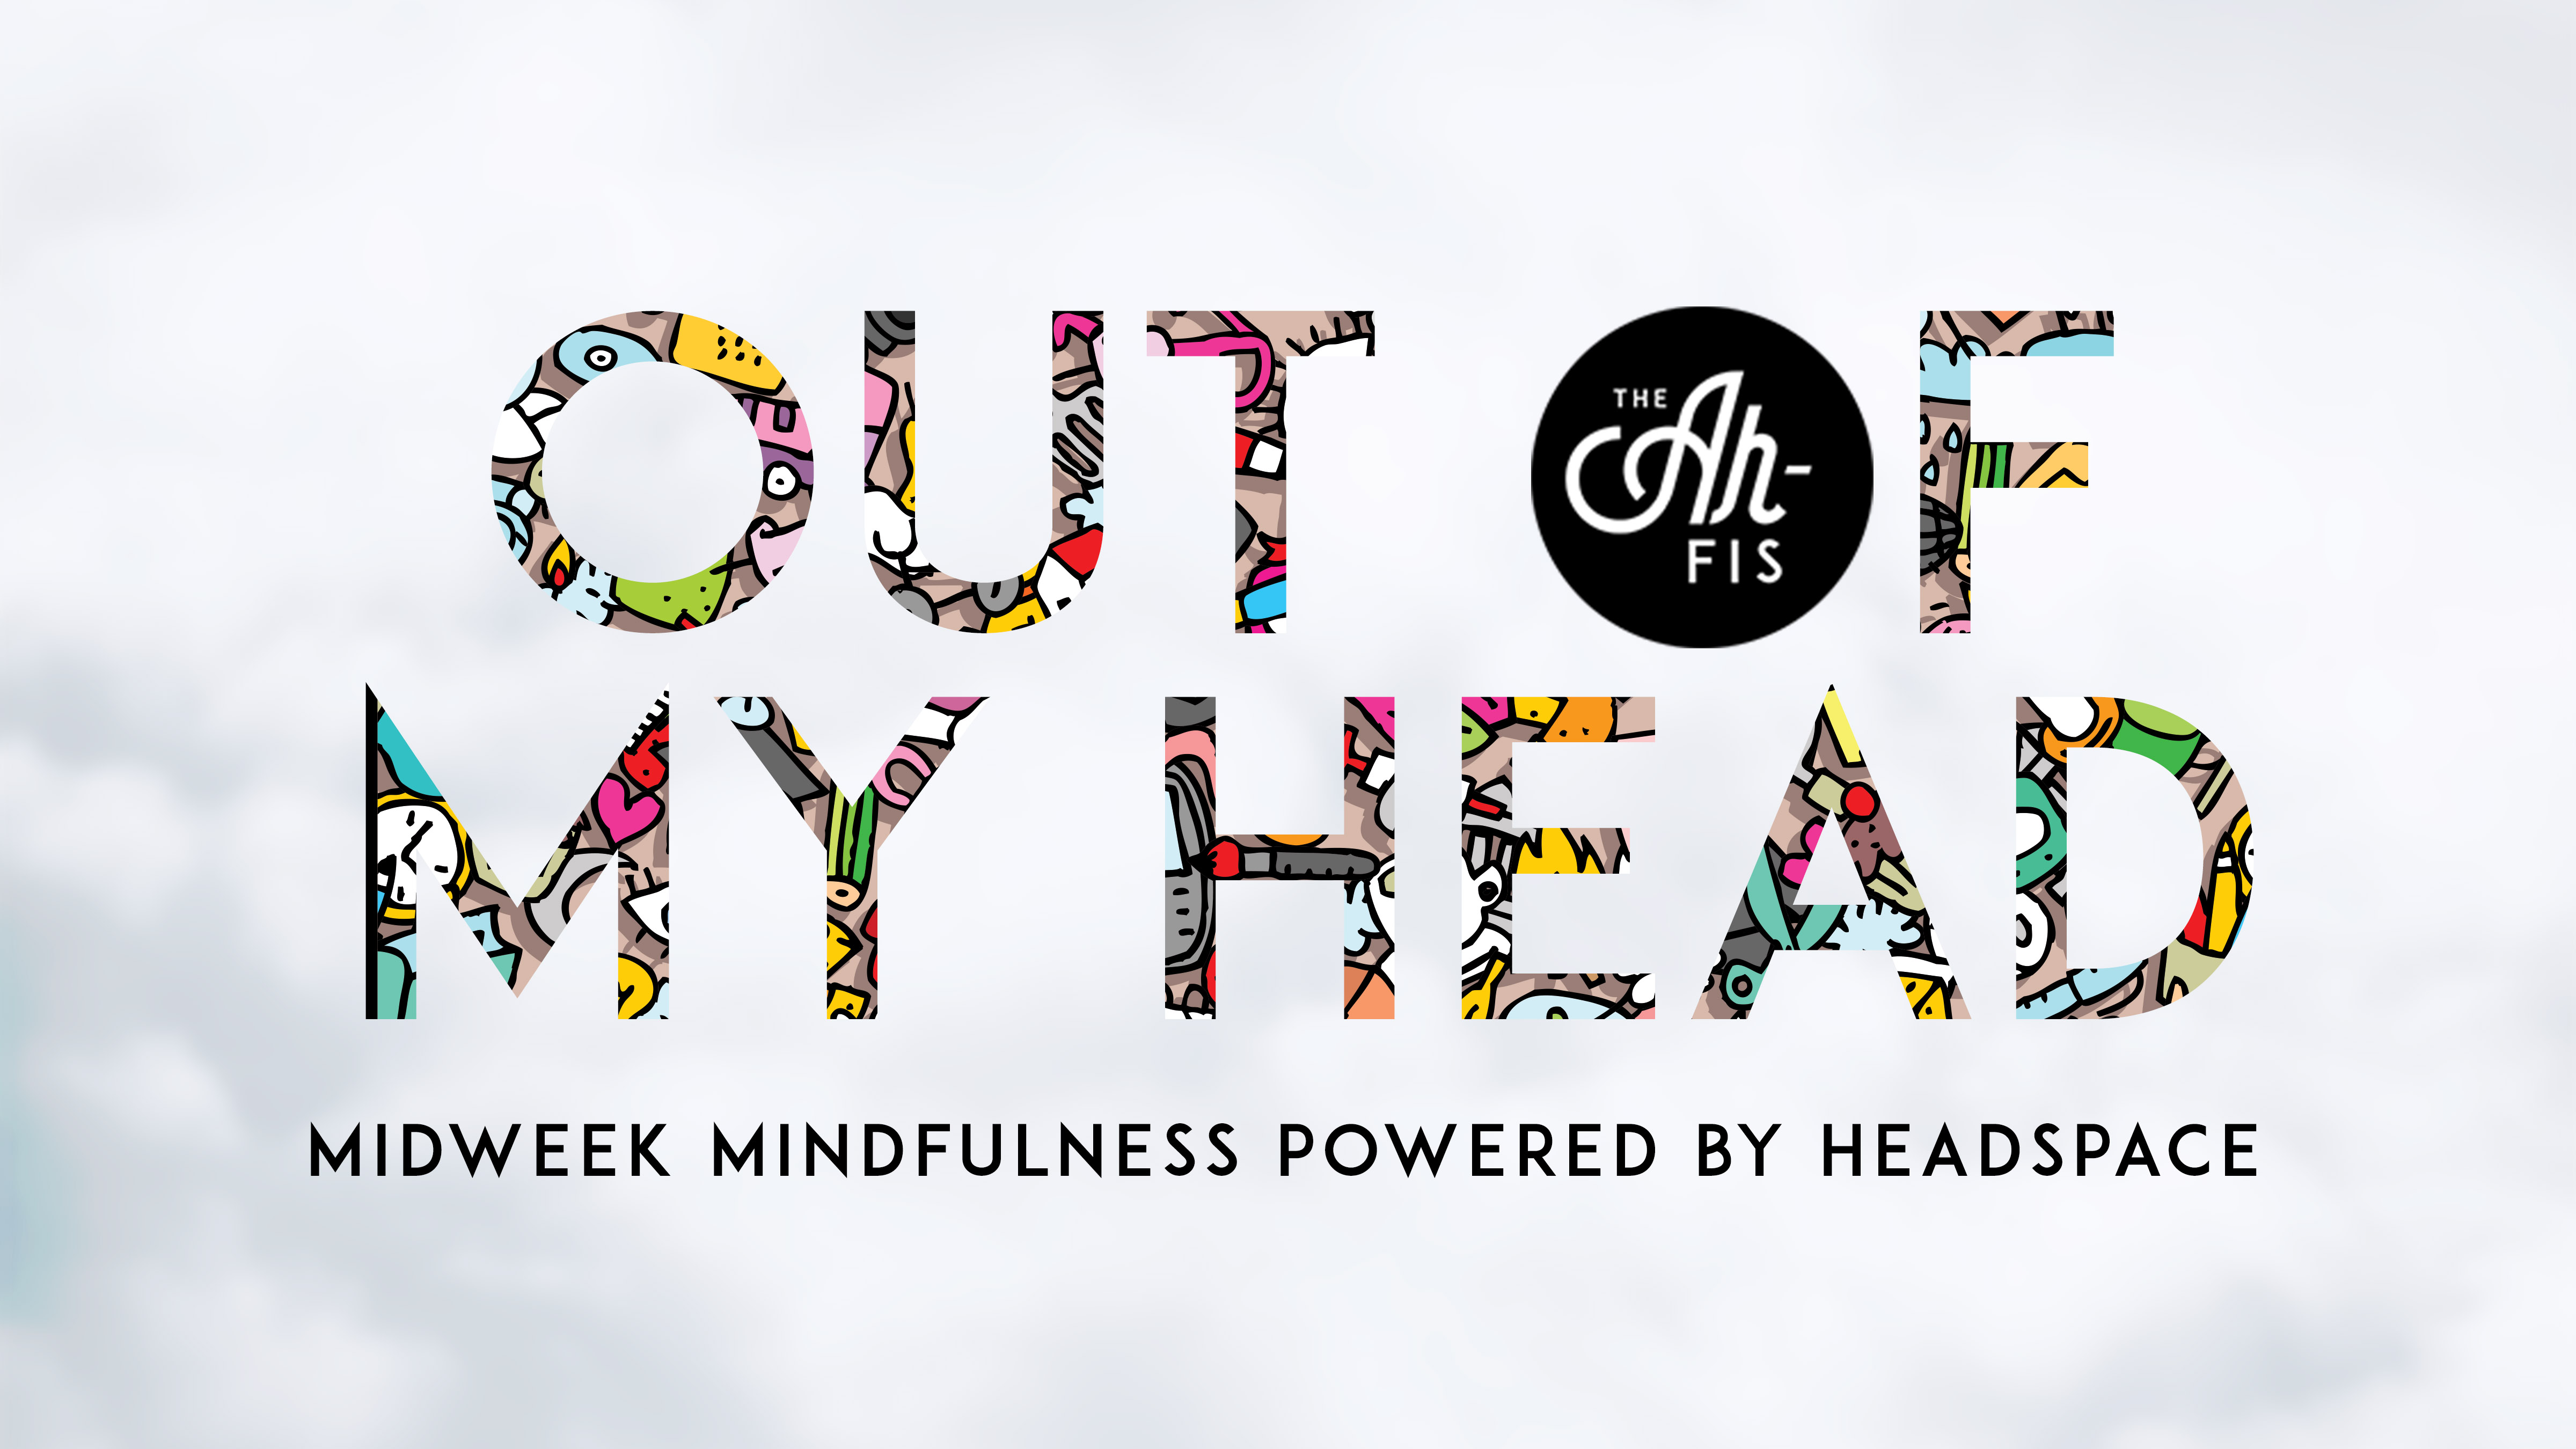 OUT of MY HEAD - Midweek mindfulness powered by Headspace